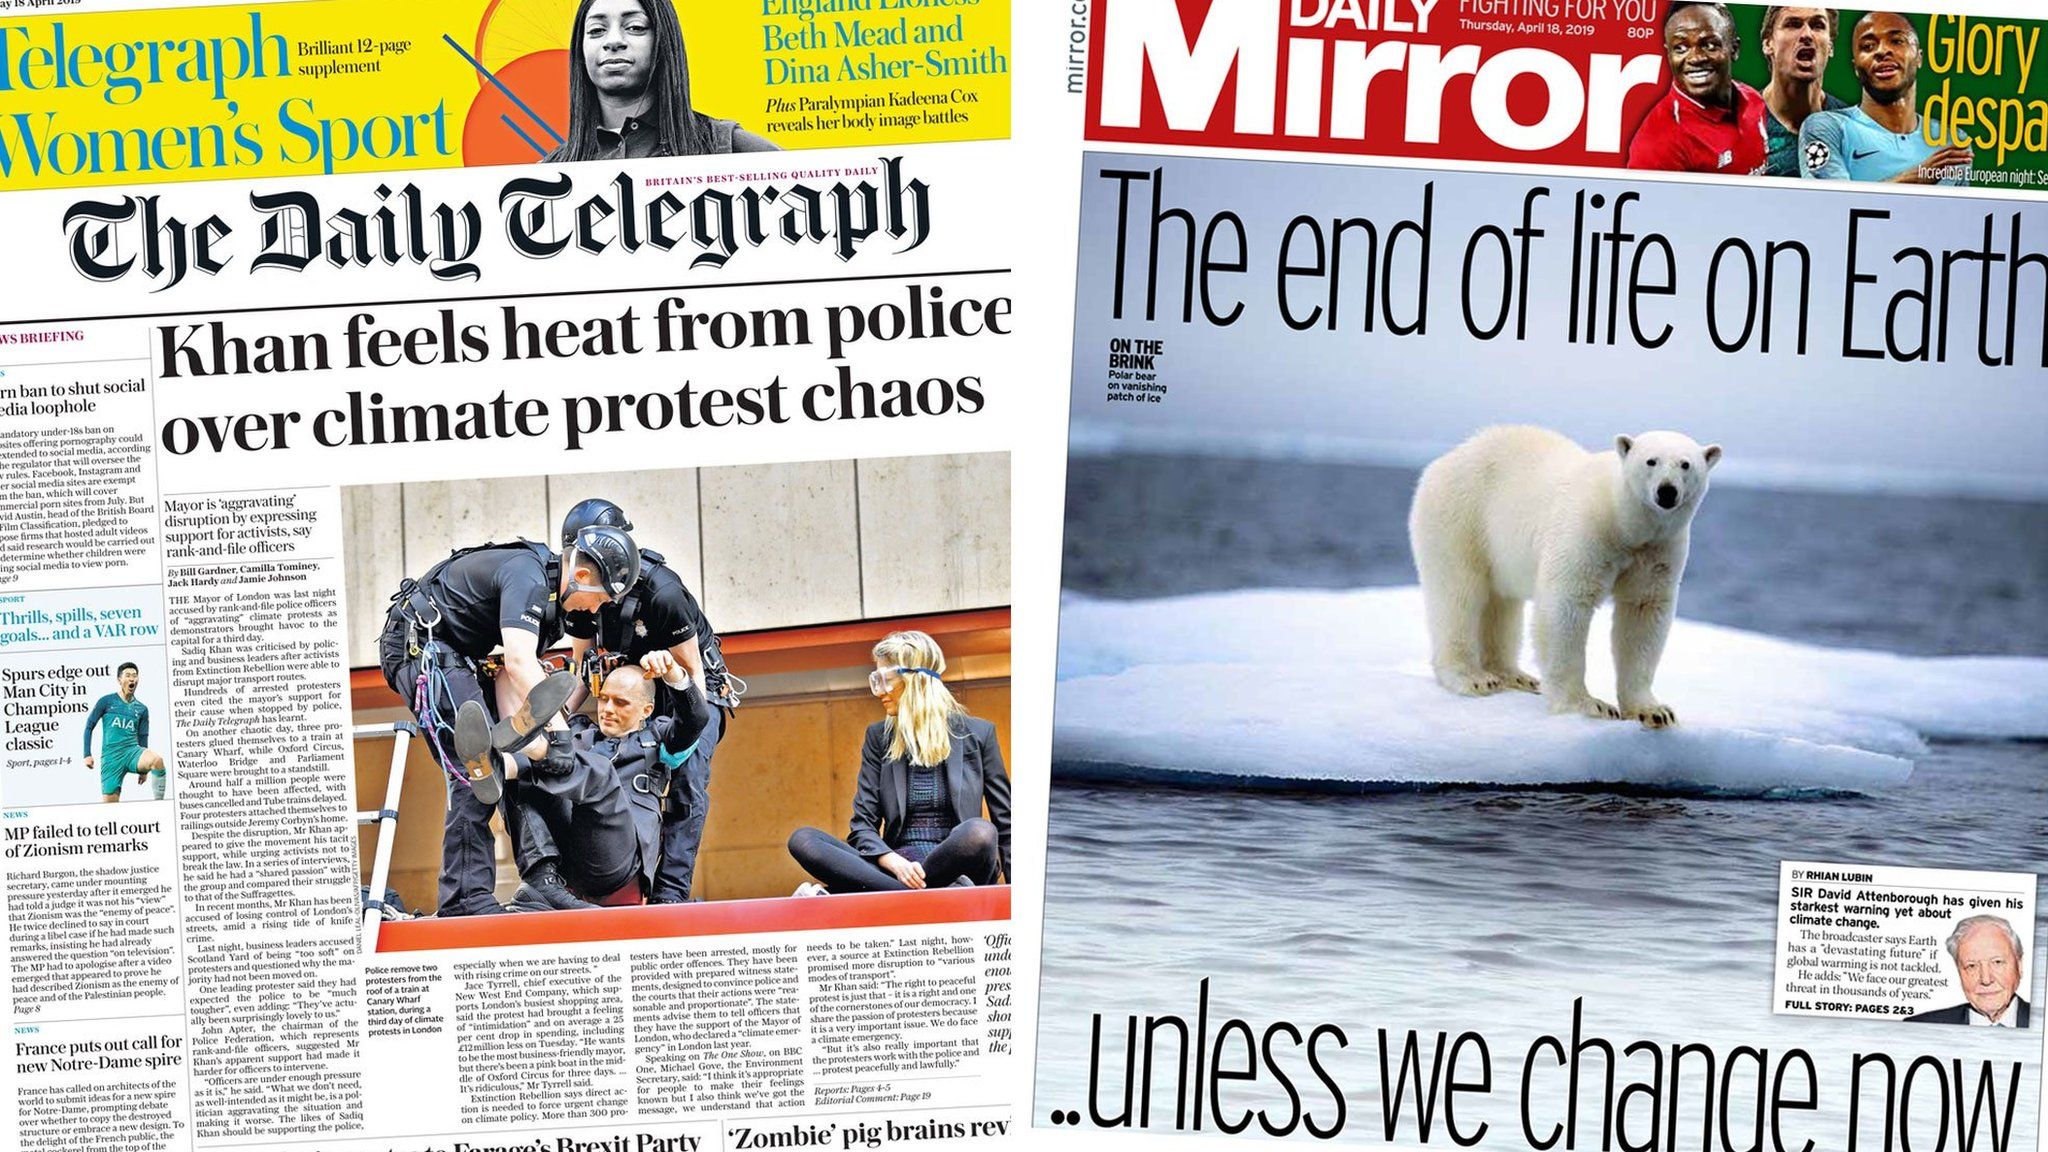 Composite image showing Daily Telegraph and Daily Mirror front pages